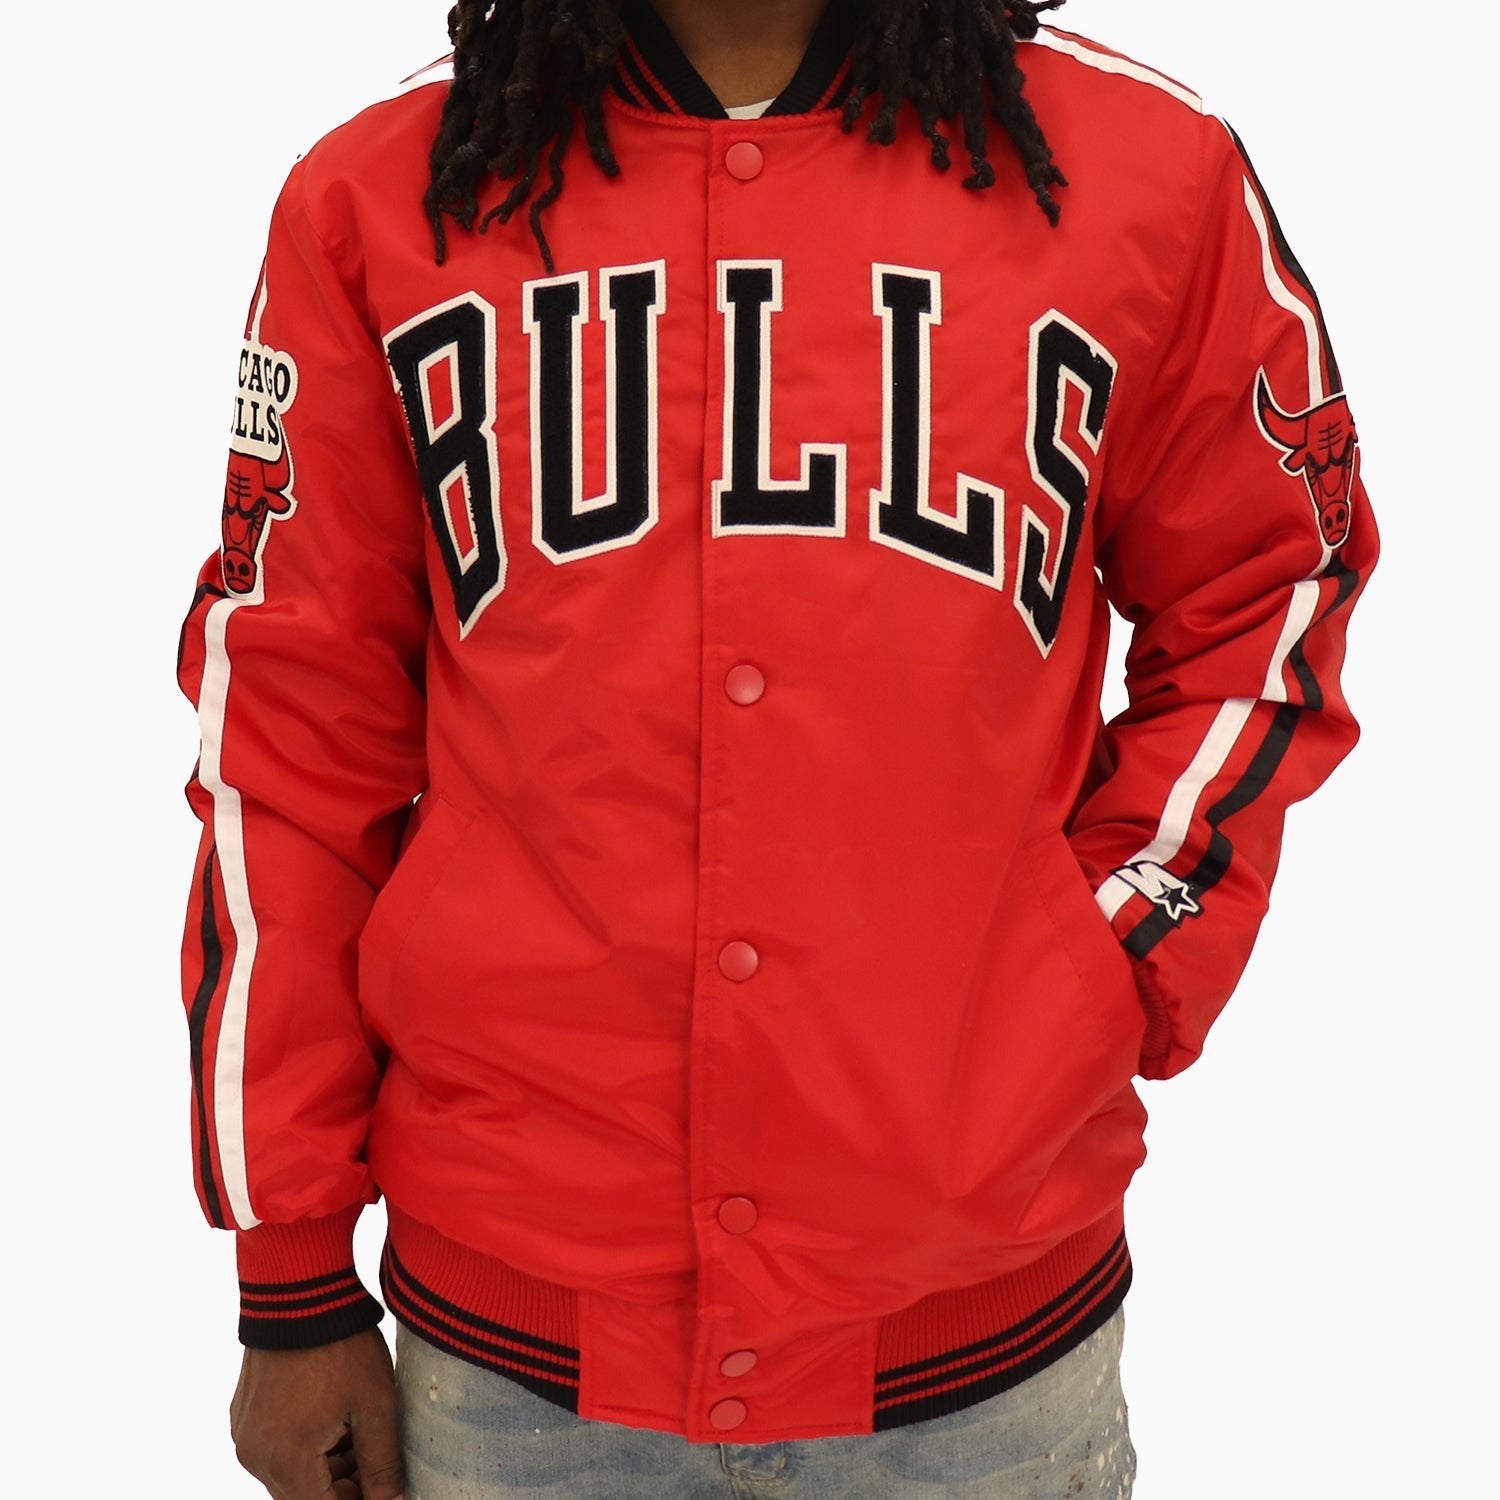 Mitchell and Ness - Men's Chicago Bulls NBA Button Down Black Jacket - X-Large